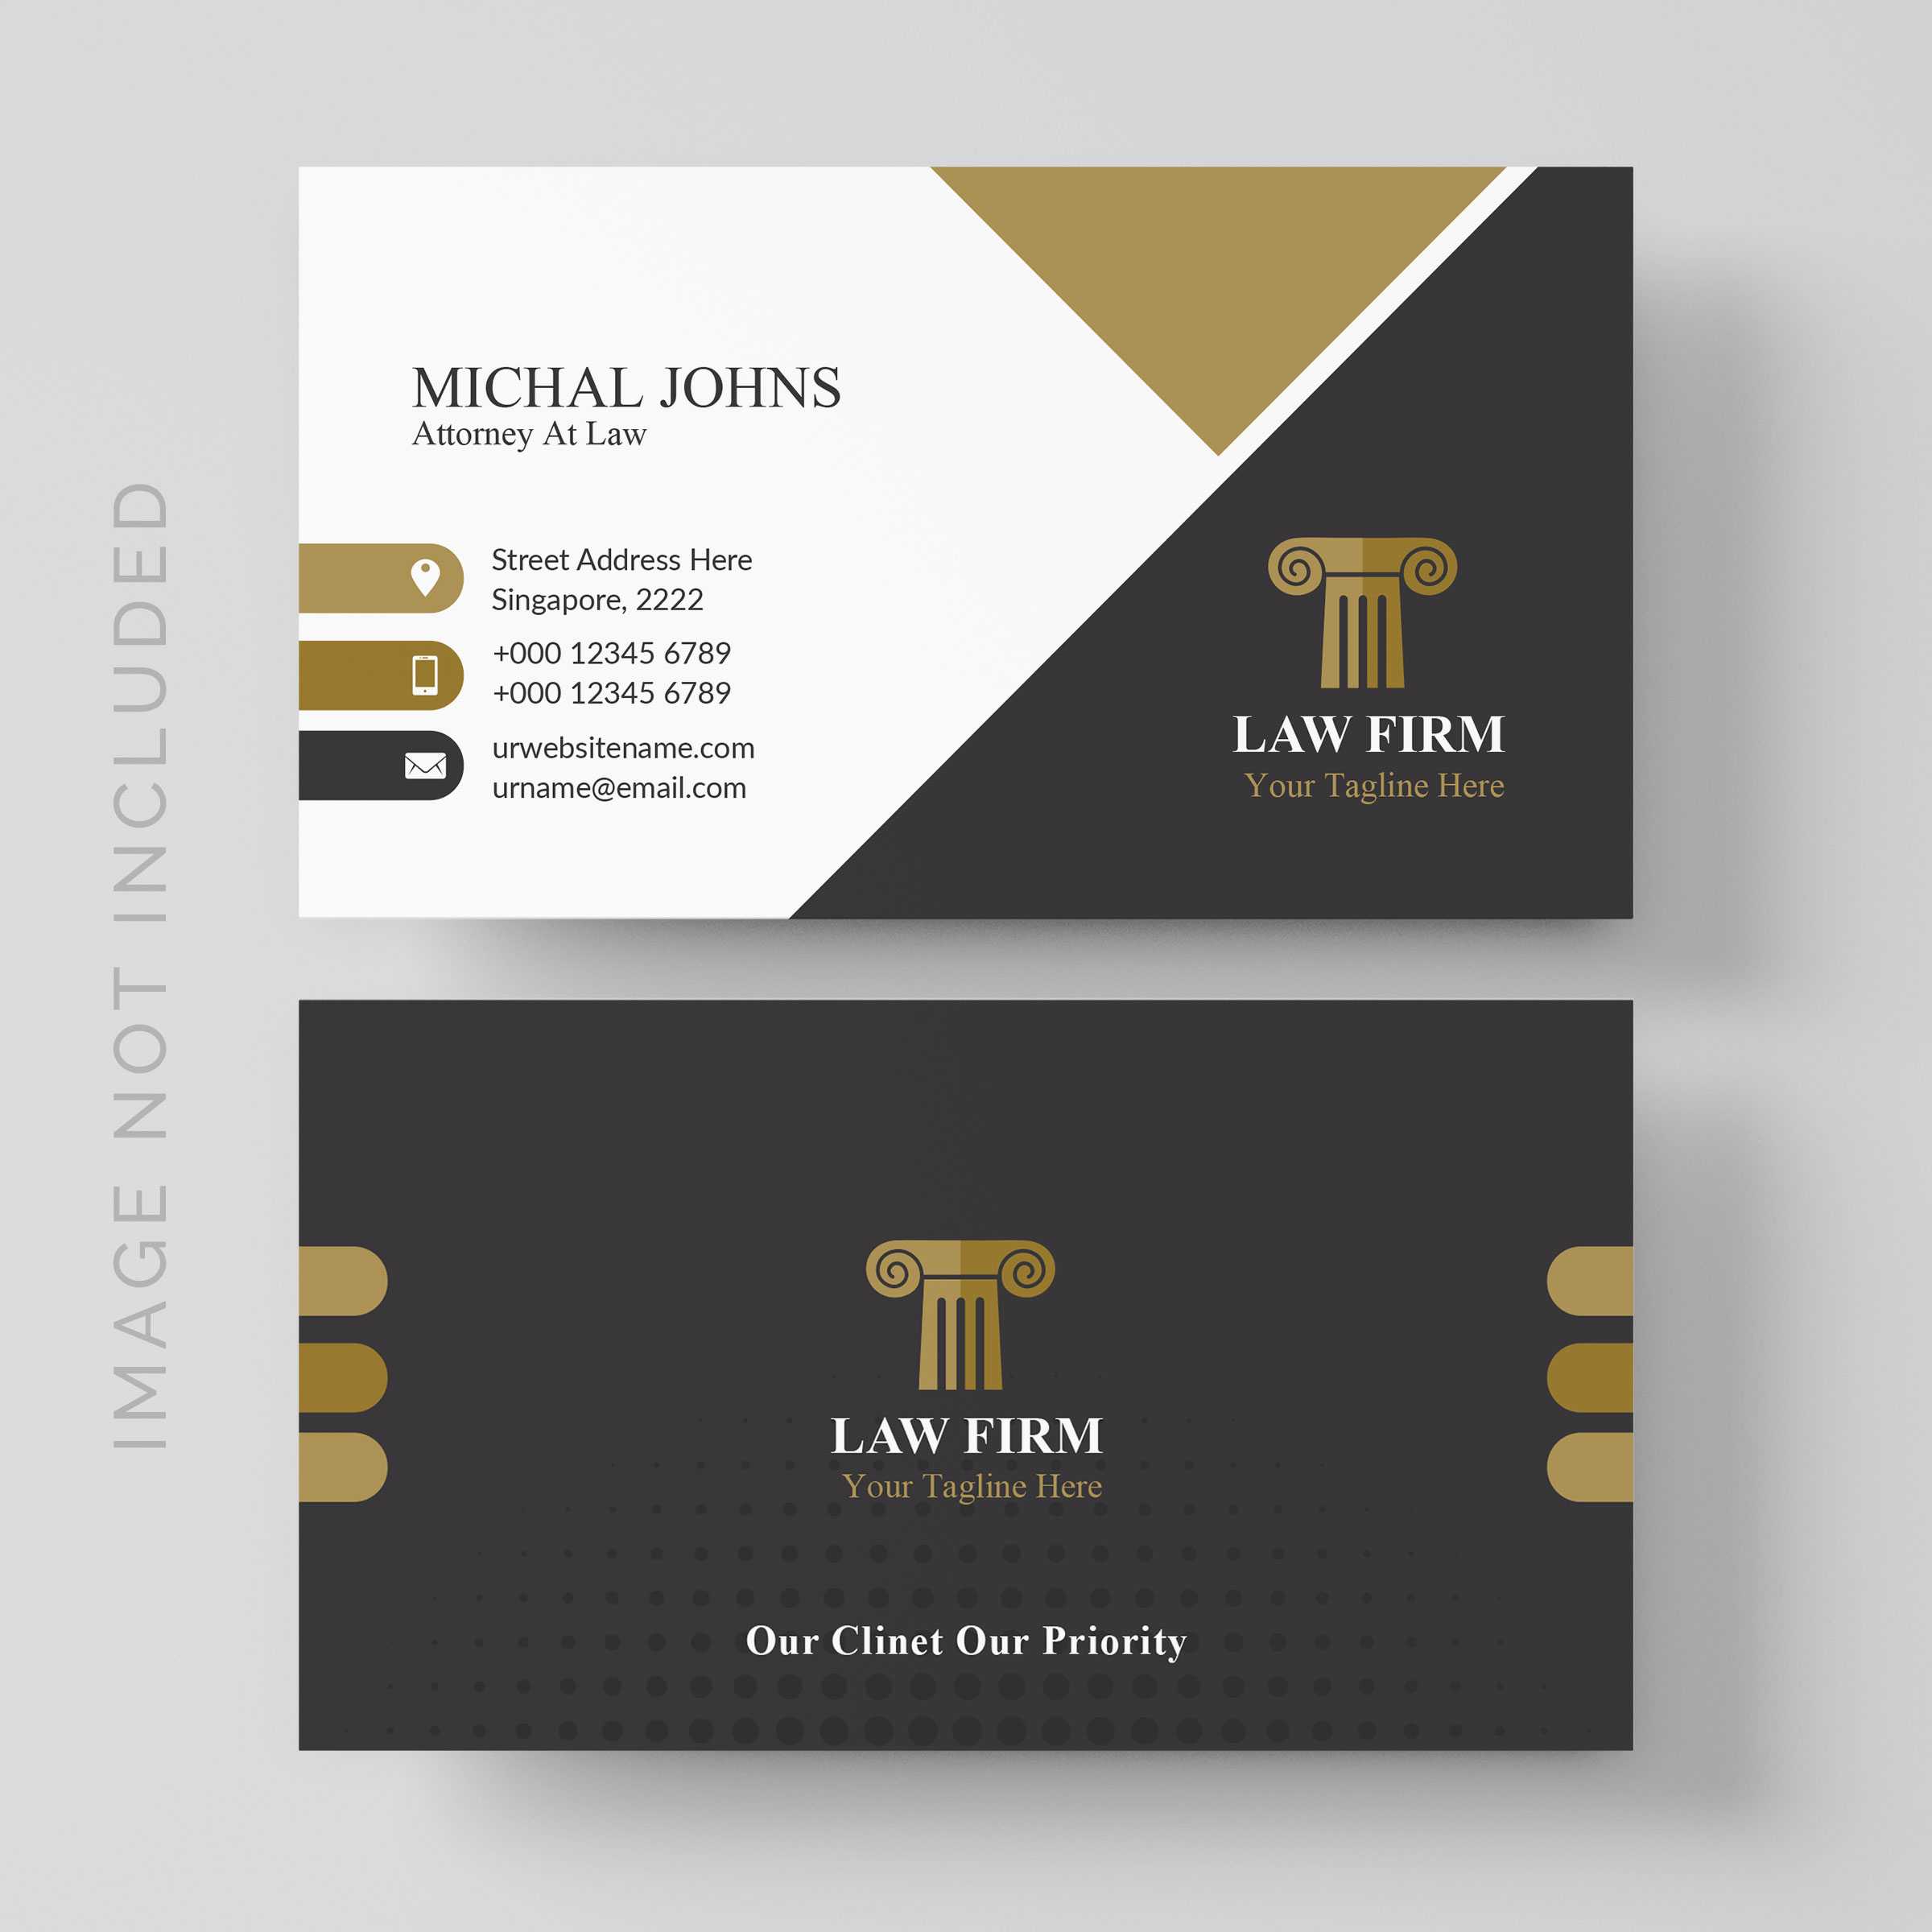 Lawyer Business Card Free Vector Art – (7 Free Downloads) Within Lawyer Business Cards Templates